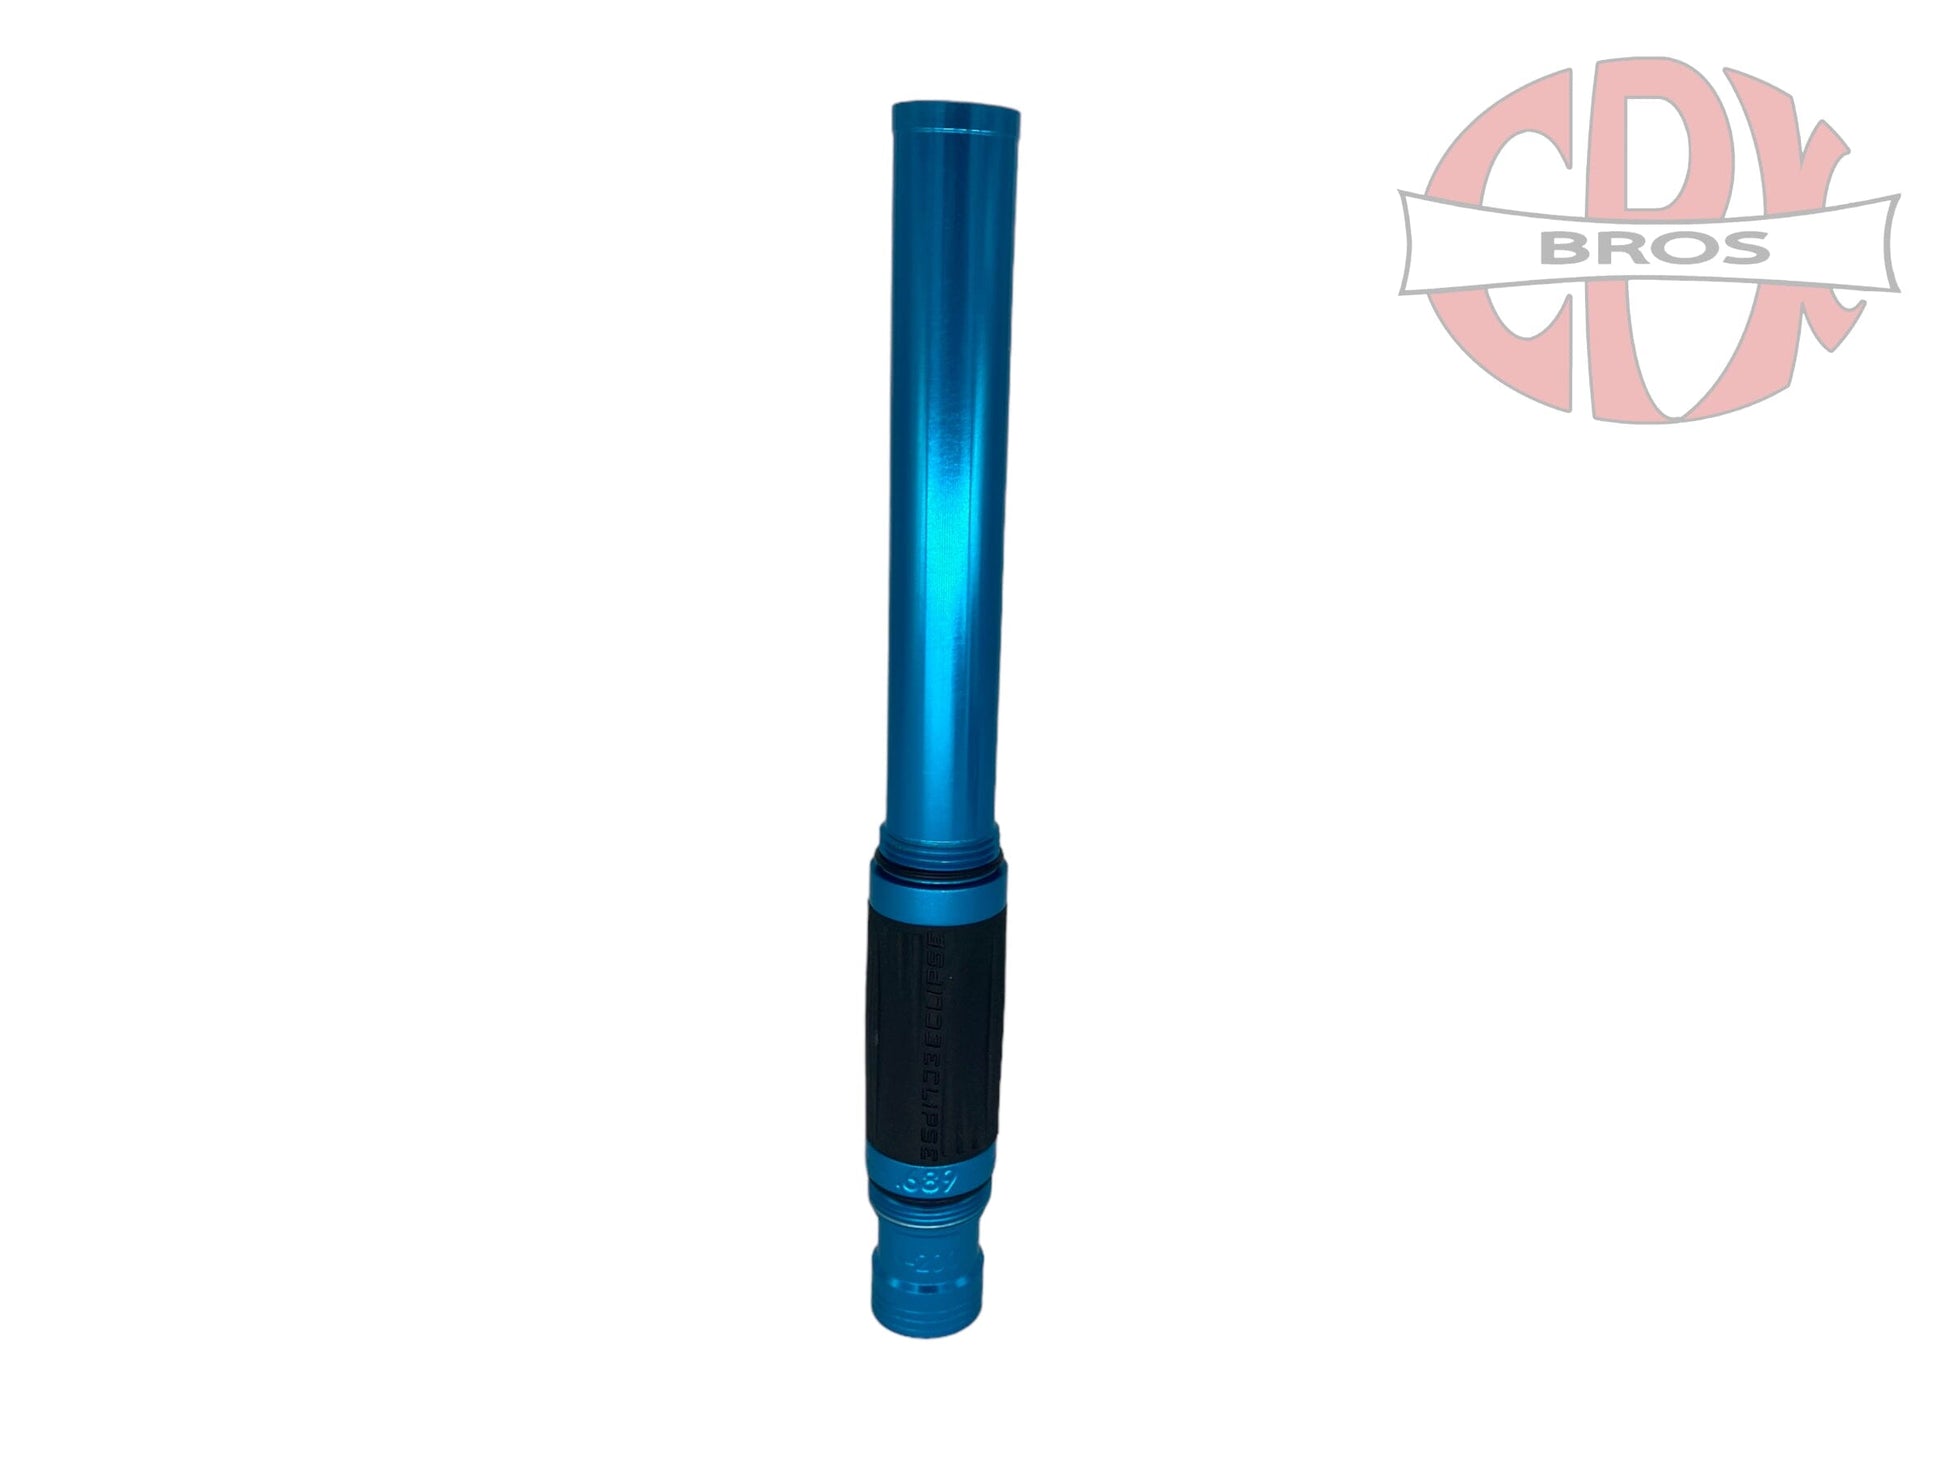 Used Planet Eclipse Shaft Fl Barrel Tip Blue .689 Paintball Gun from CPXBrosPaintball Buy/Sell/Trade Paintball Markers, Paintball Hoppers, Paintball Masks, and Hormesis Headbands